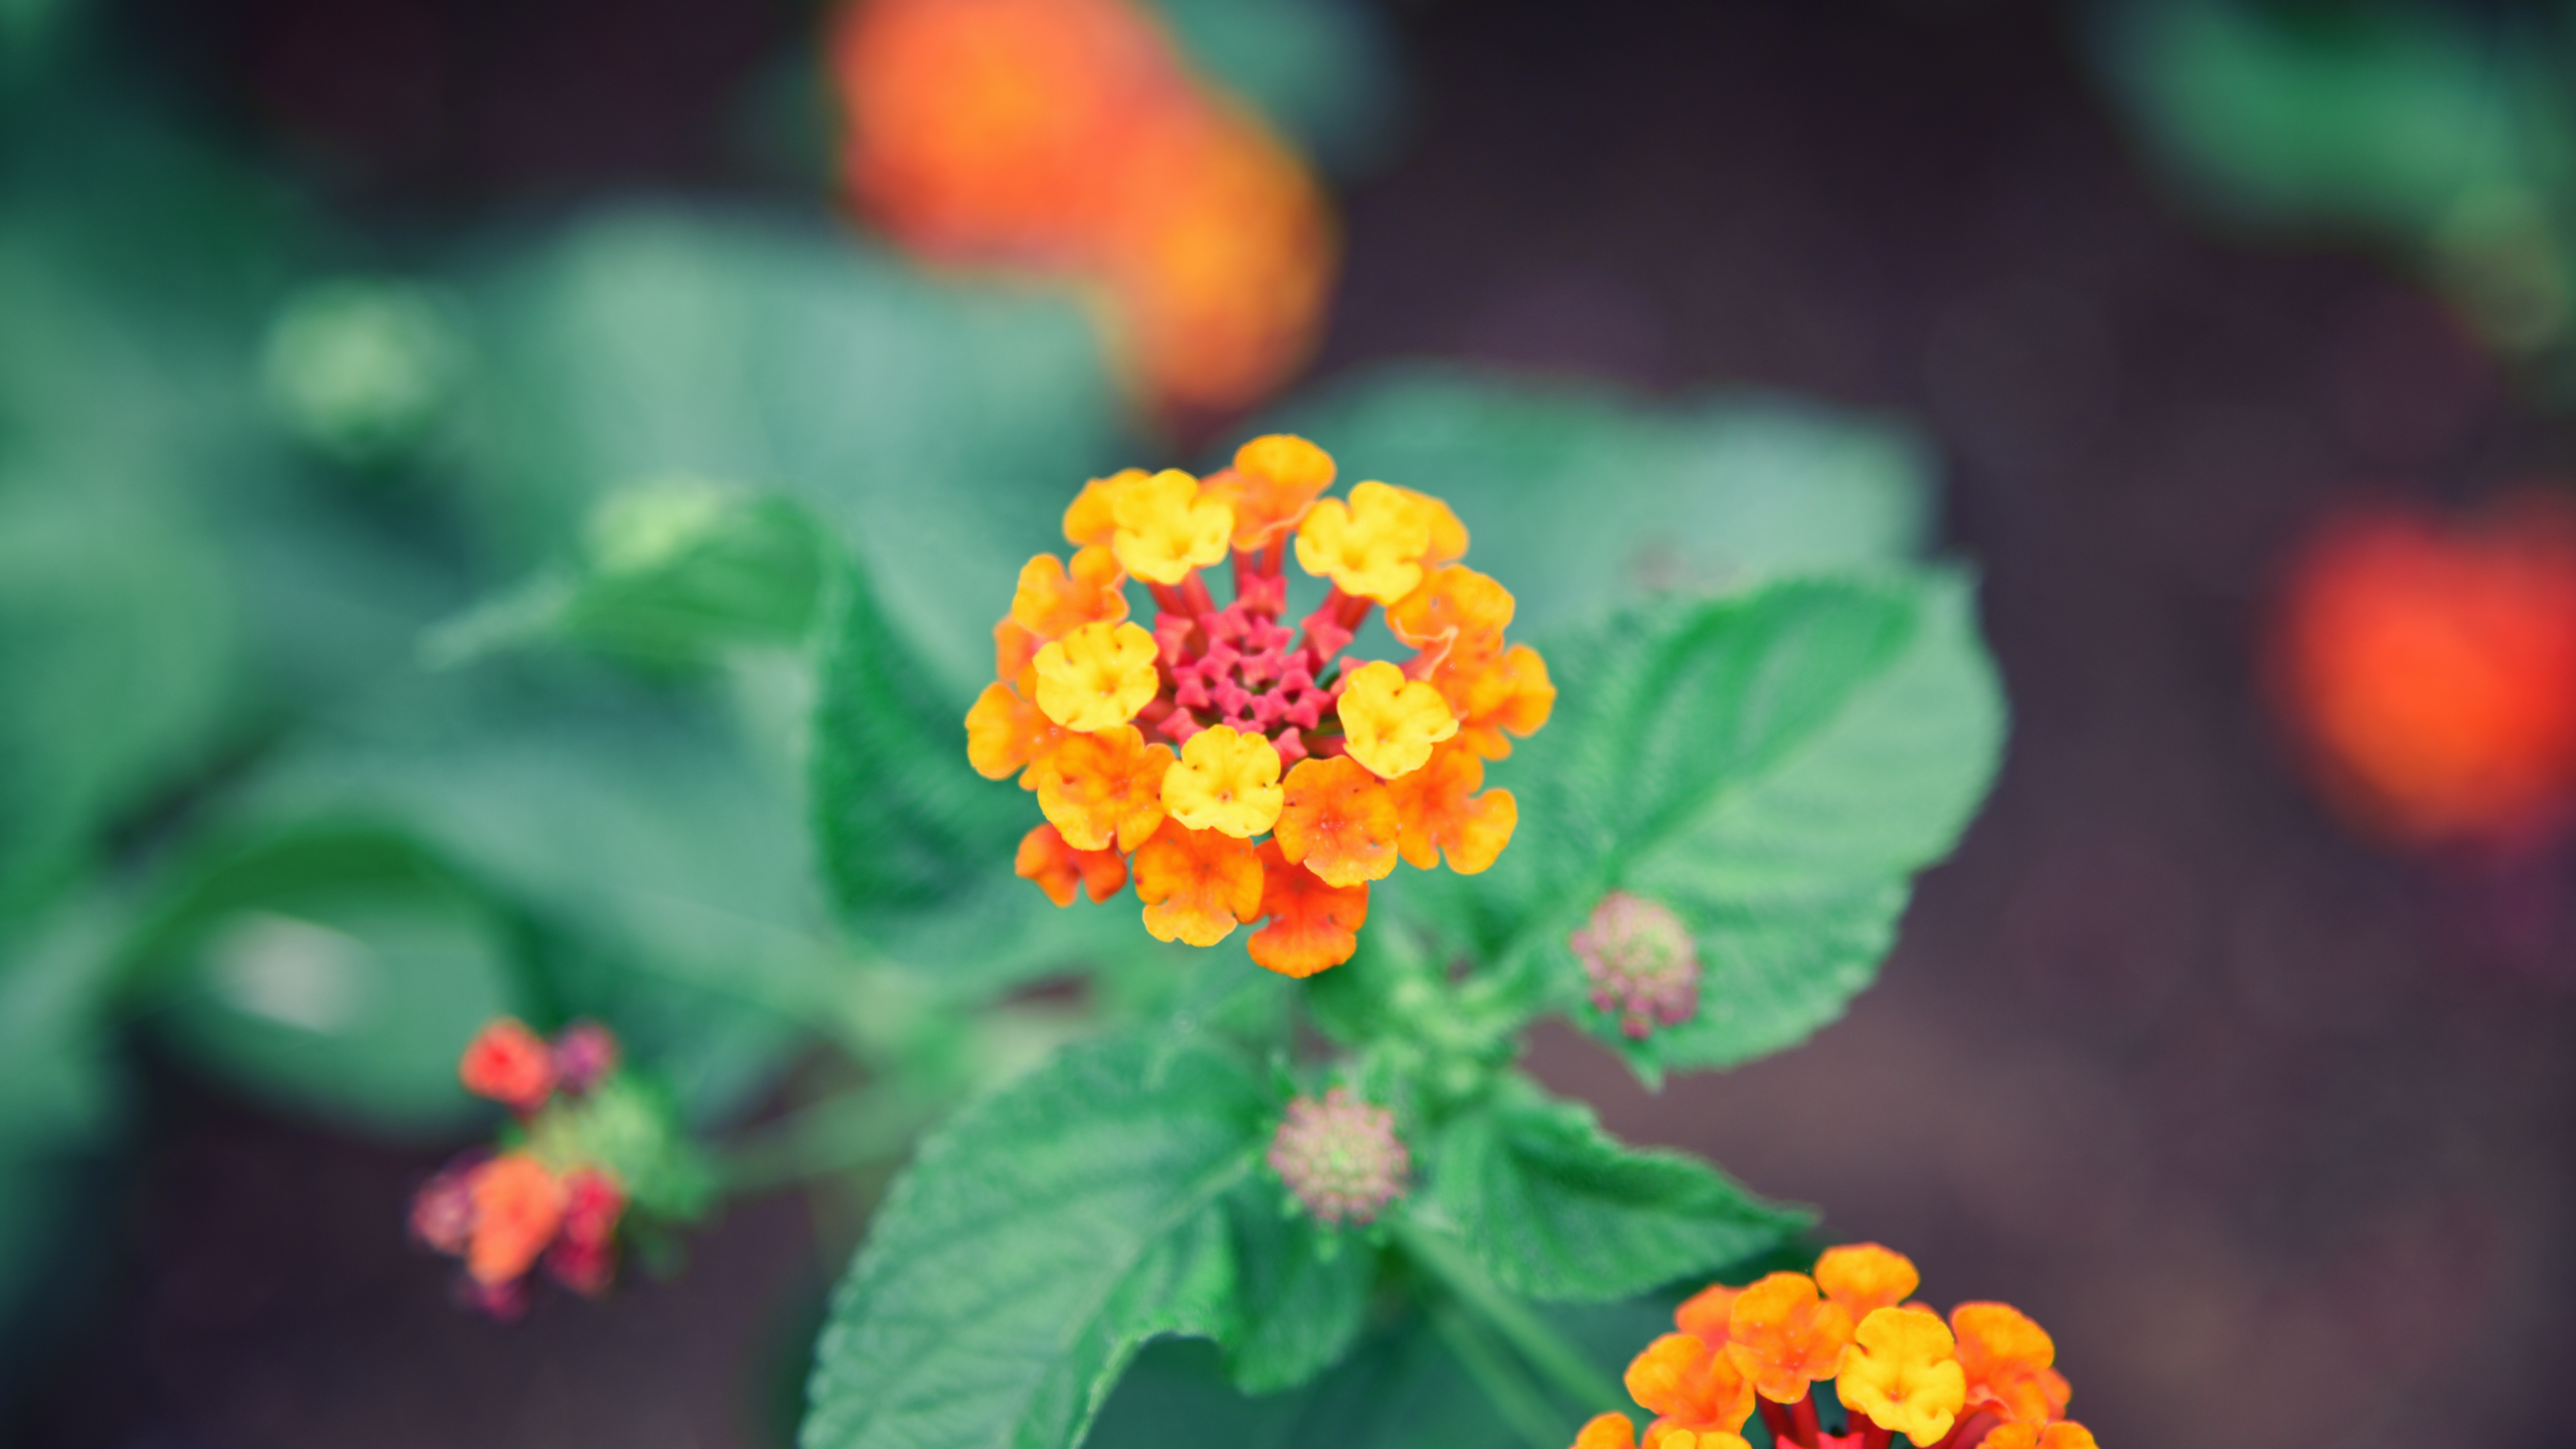 General 6016x3384 photography plants colorful flowers yellow flowers